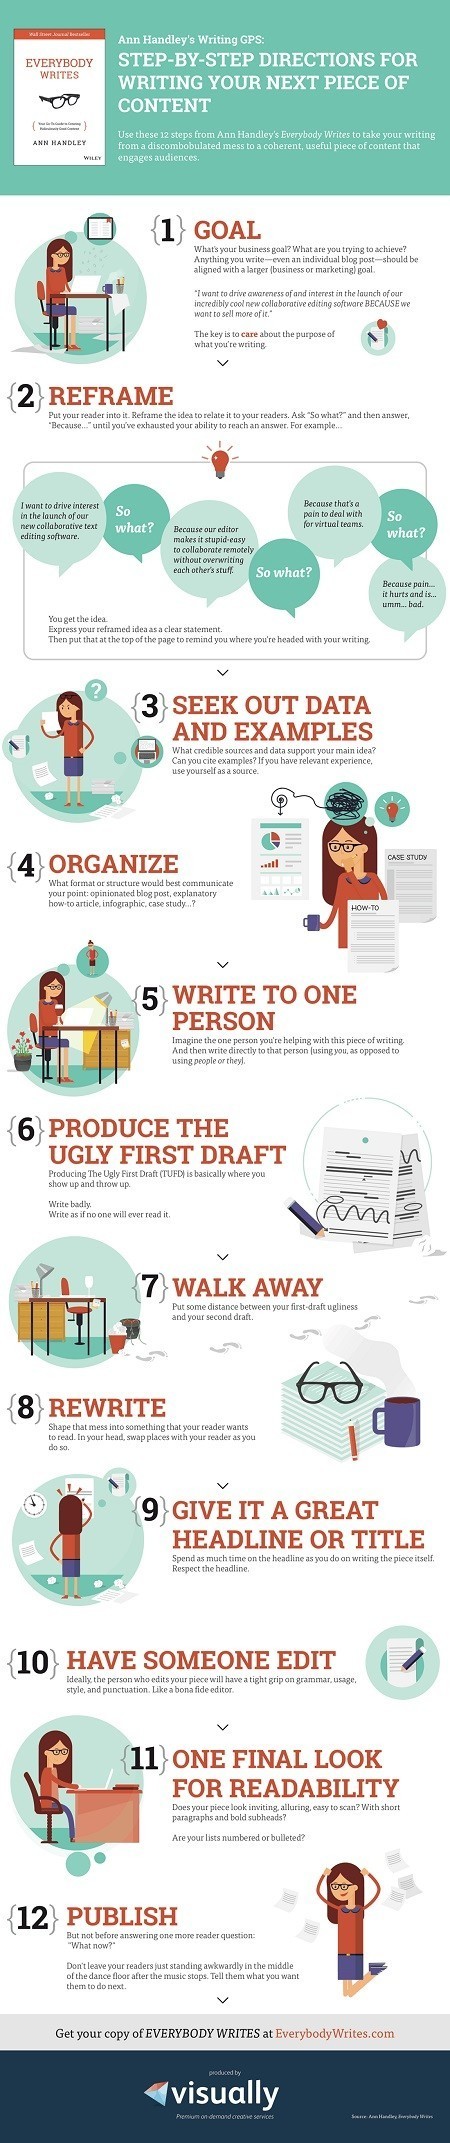 Step-by-Step Directions for Writing Your Next Piece of Content [Infographic] - Profs | The MarTech Digest | Scoop.it